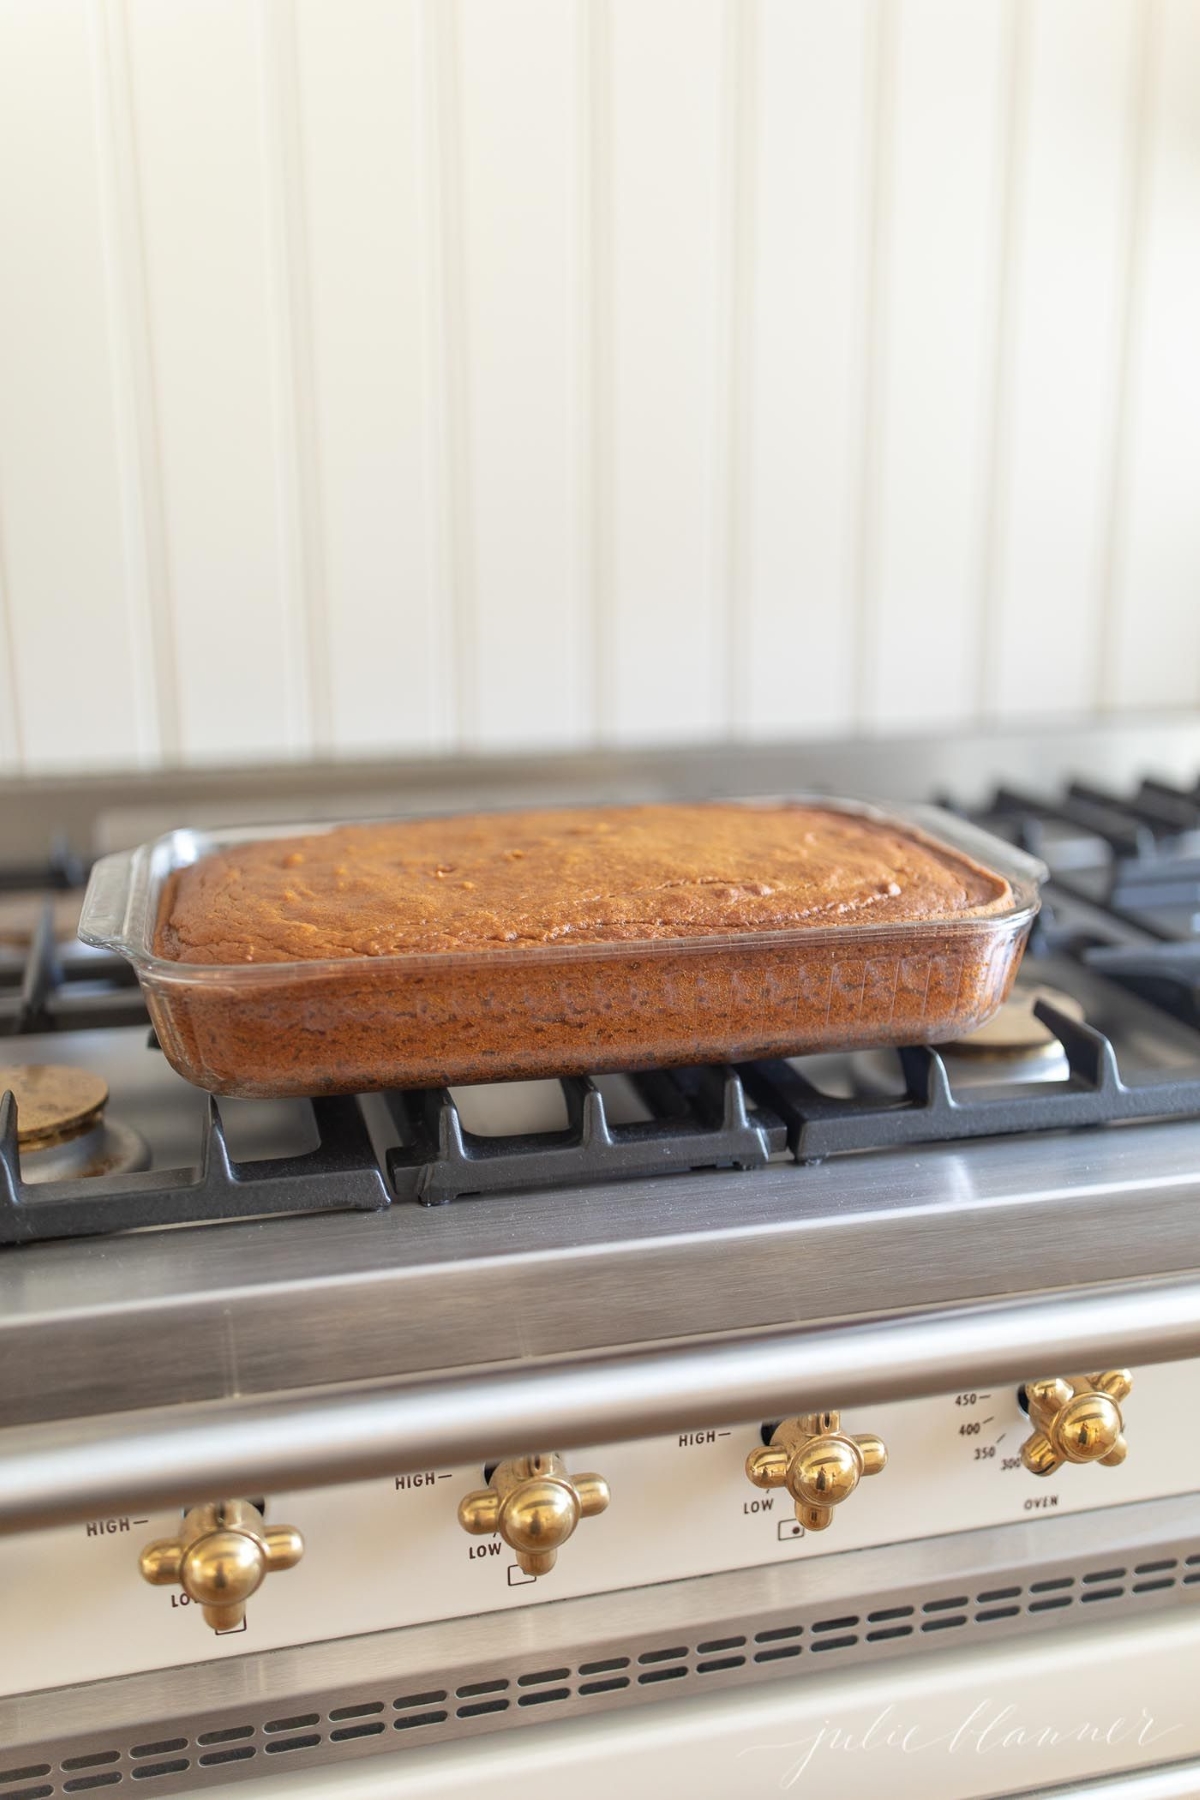 A pumpkin cake baked in a glass 9 by 13 inch baking pan, resting on top of a range.